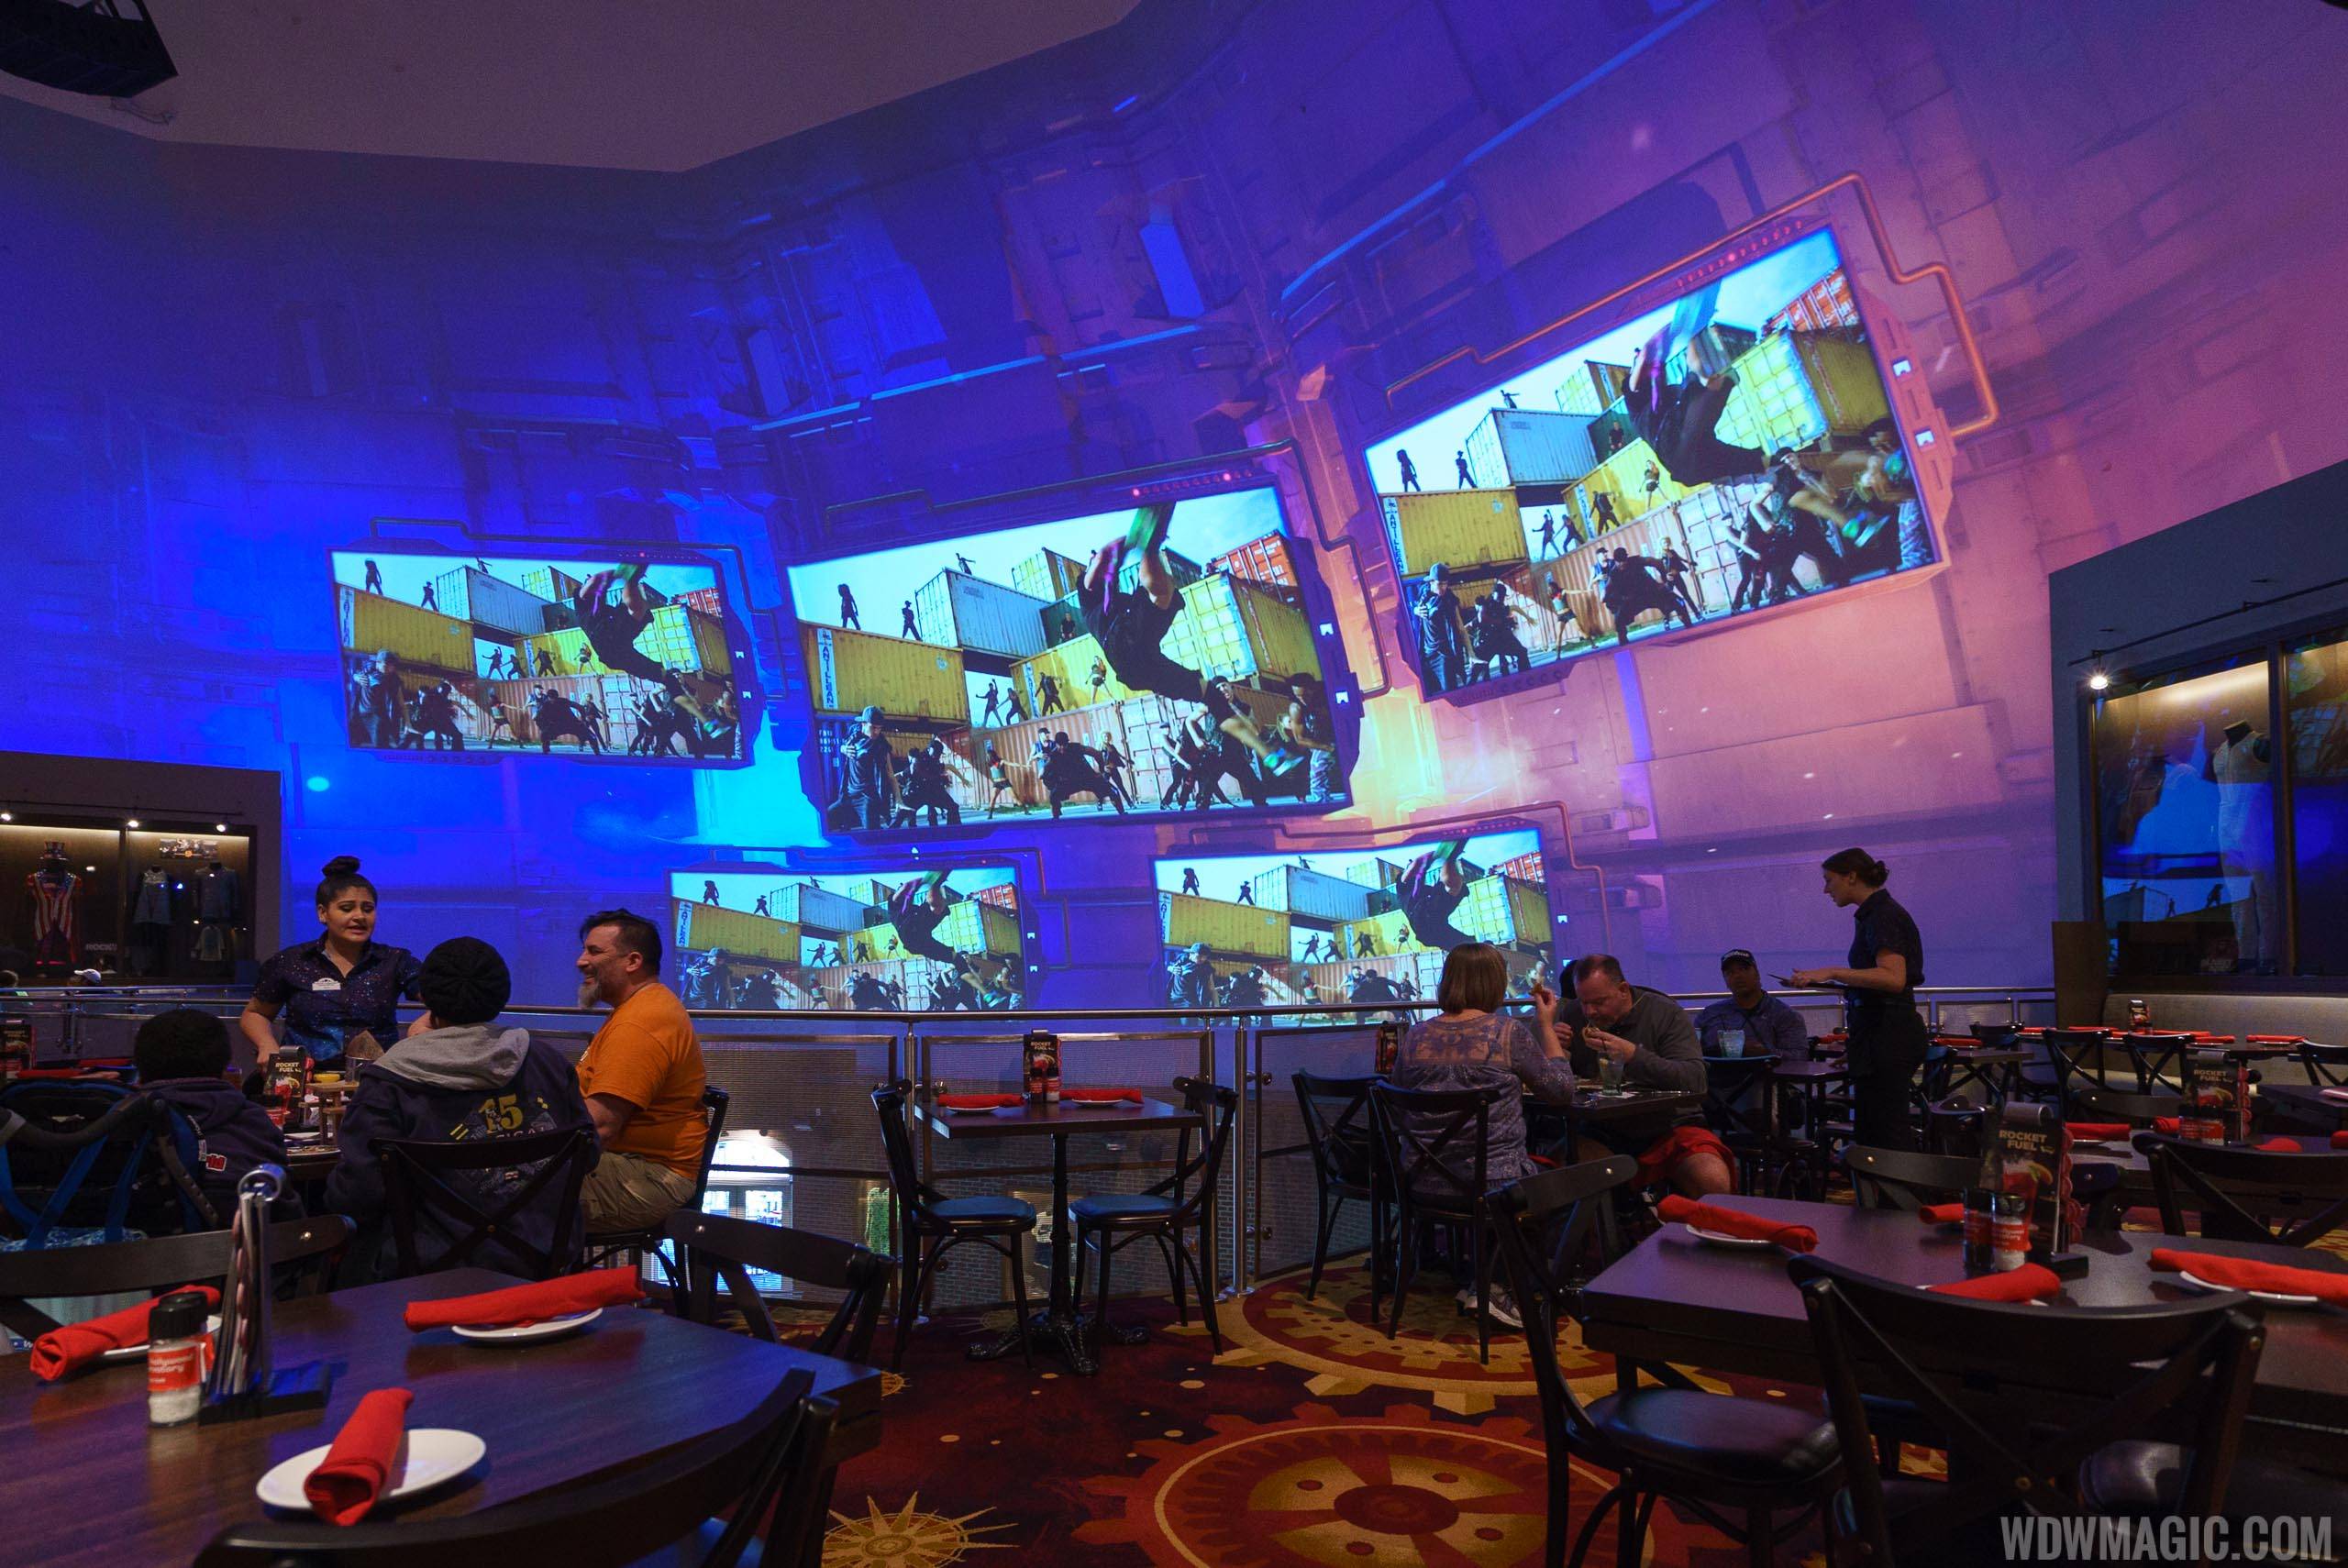 Planet Hollywood Observatory - Second level view of video wall